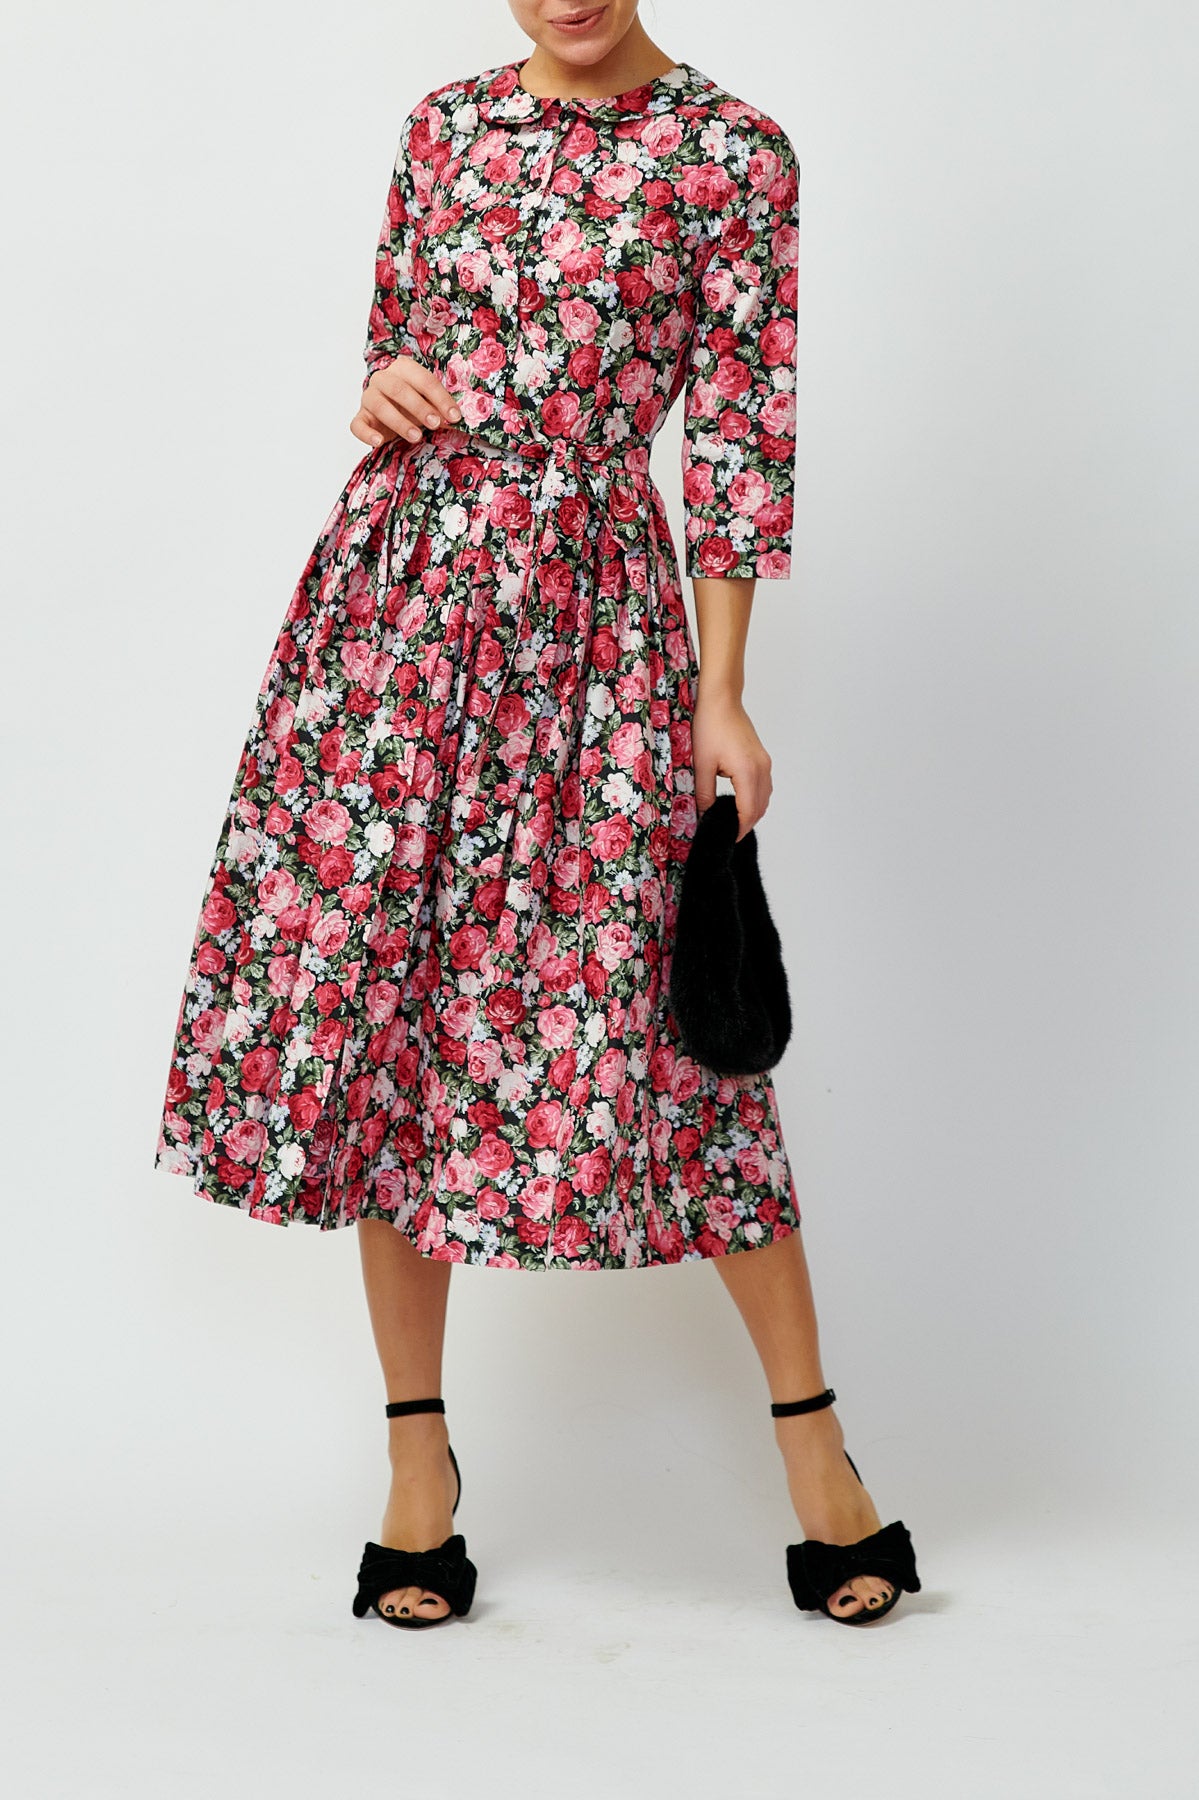 Shirt dress with roses on black